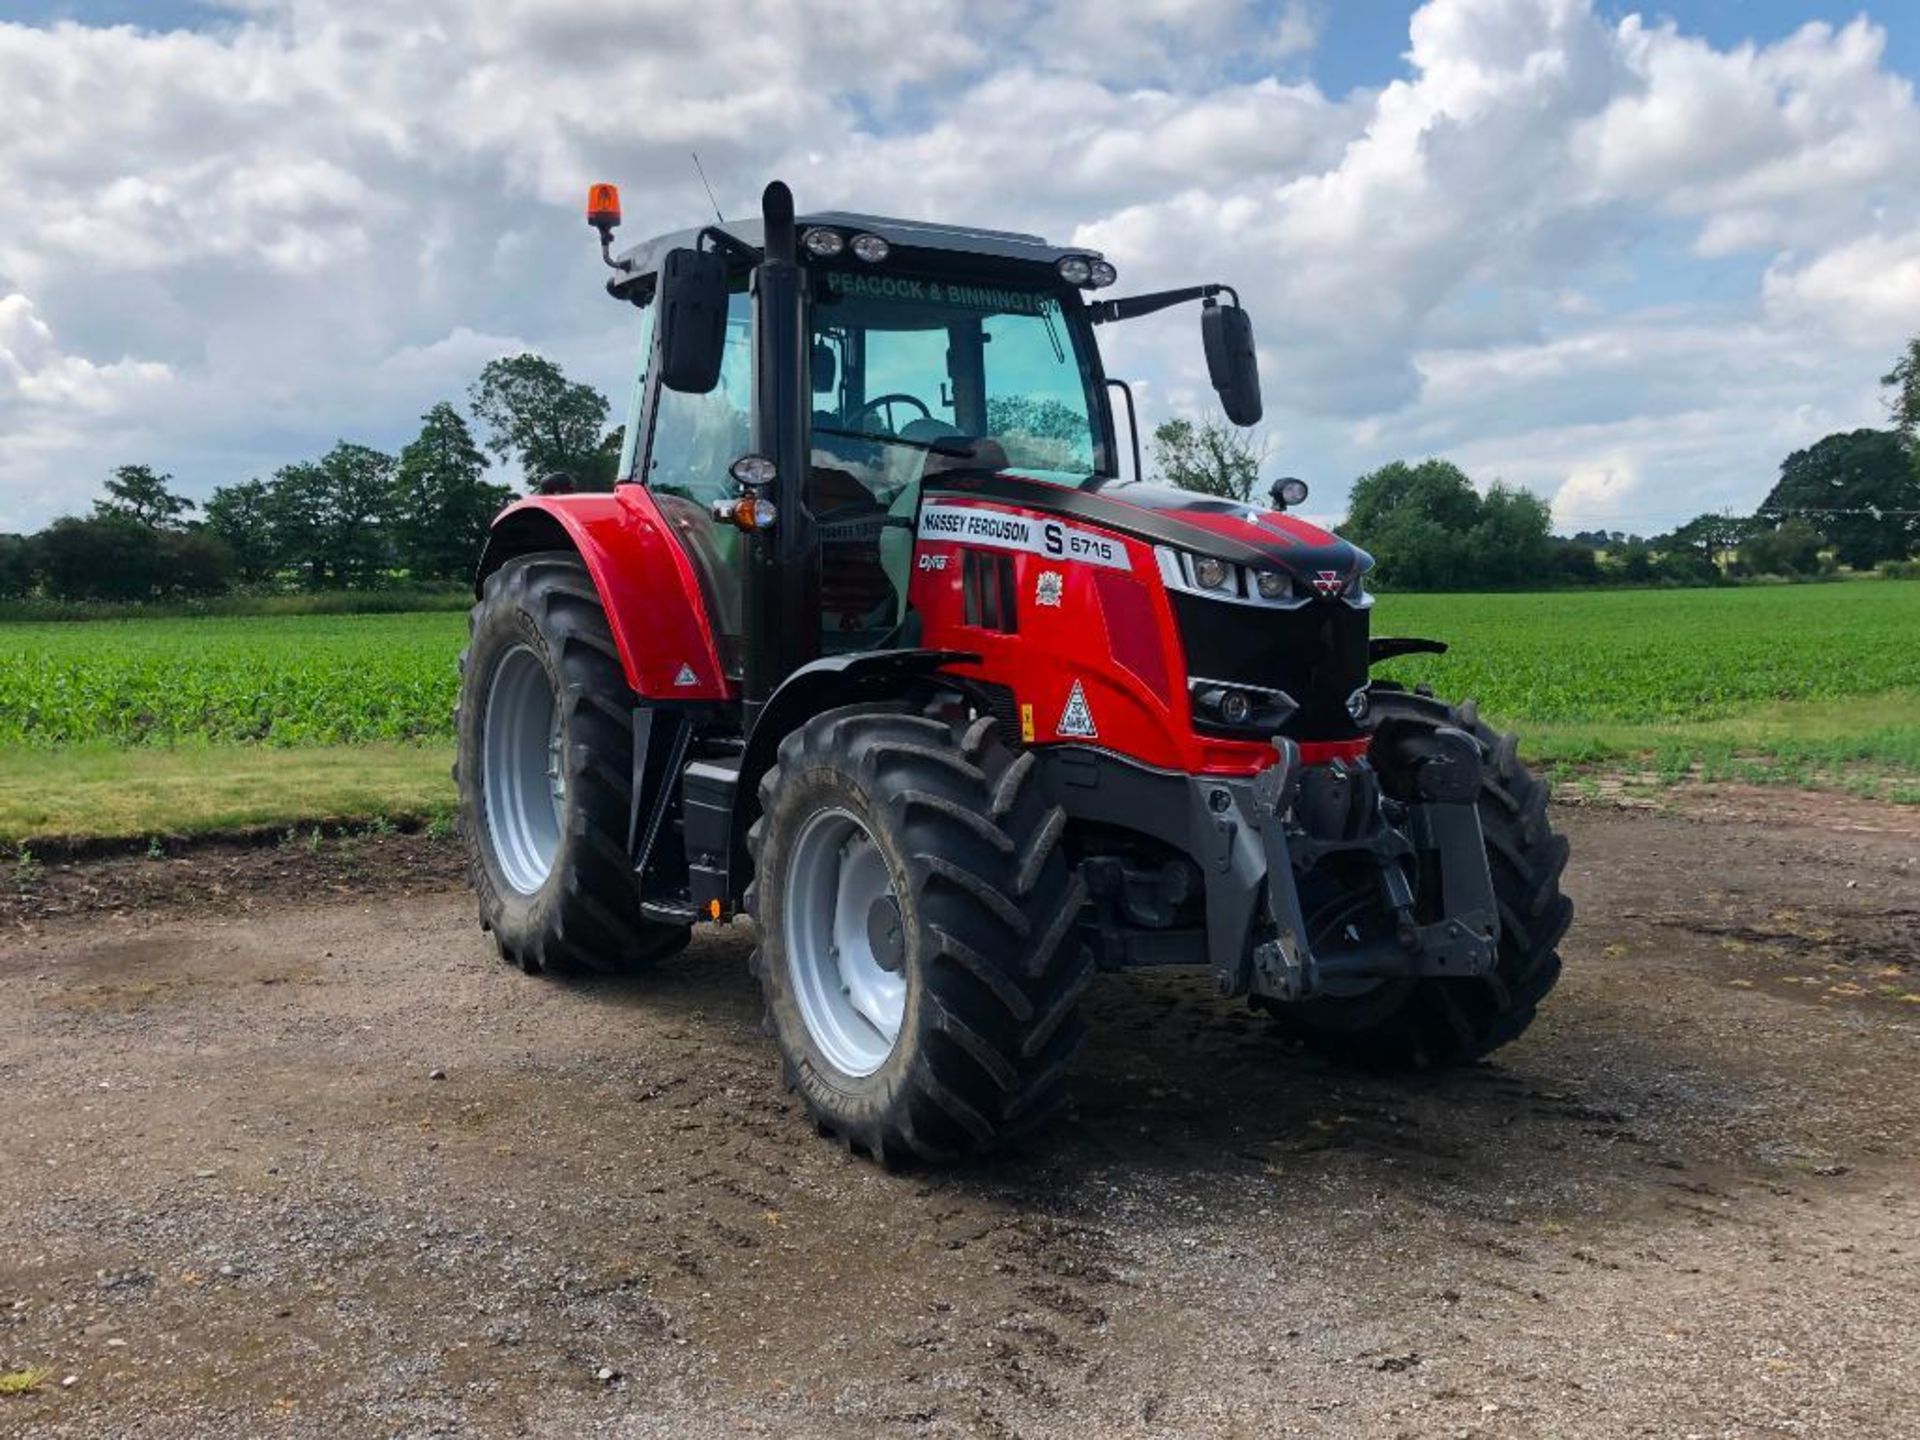 2019 Massey Ferguson 6715 S Dyna 6 50kph 4wd tractor c/w 3 manual spools, front linkage, air brakes, - Image 16 of 41